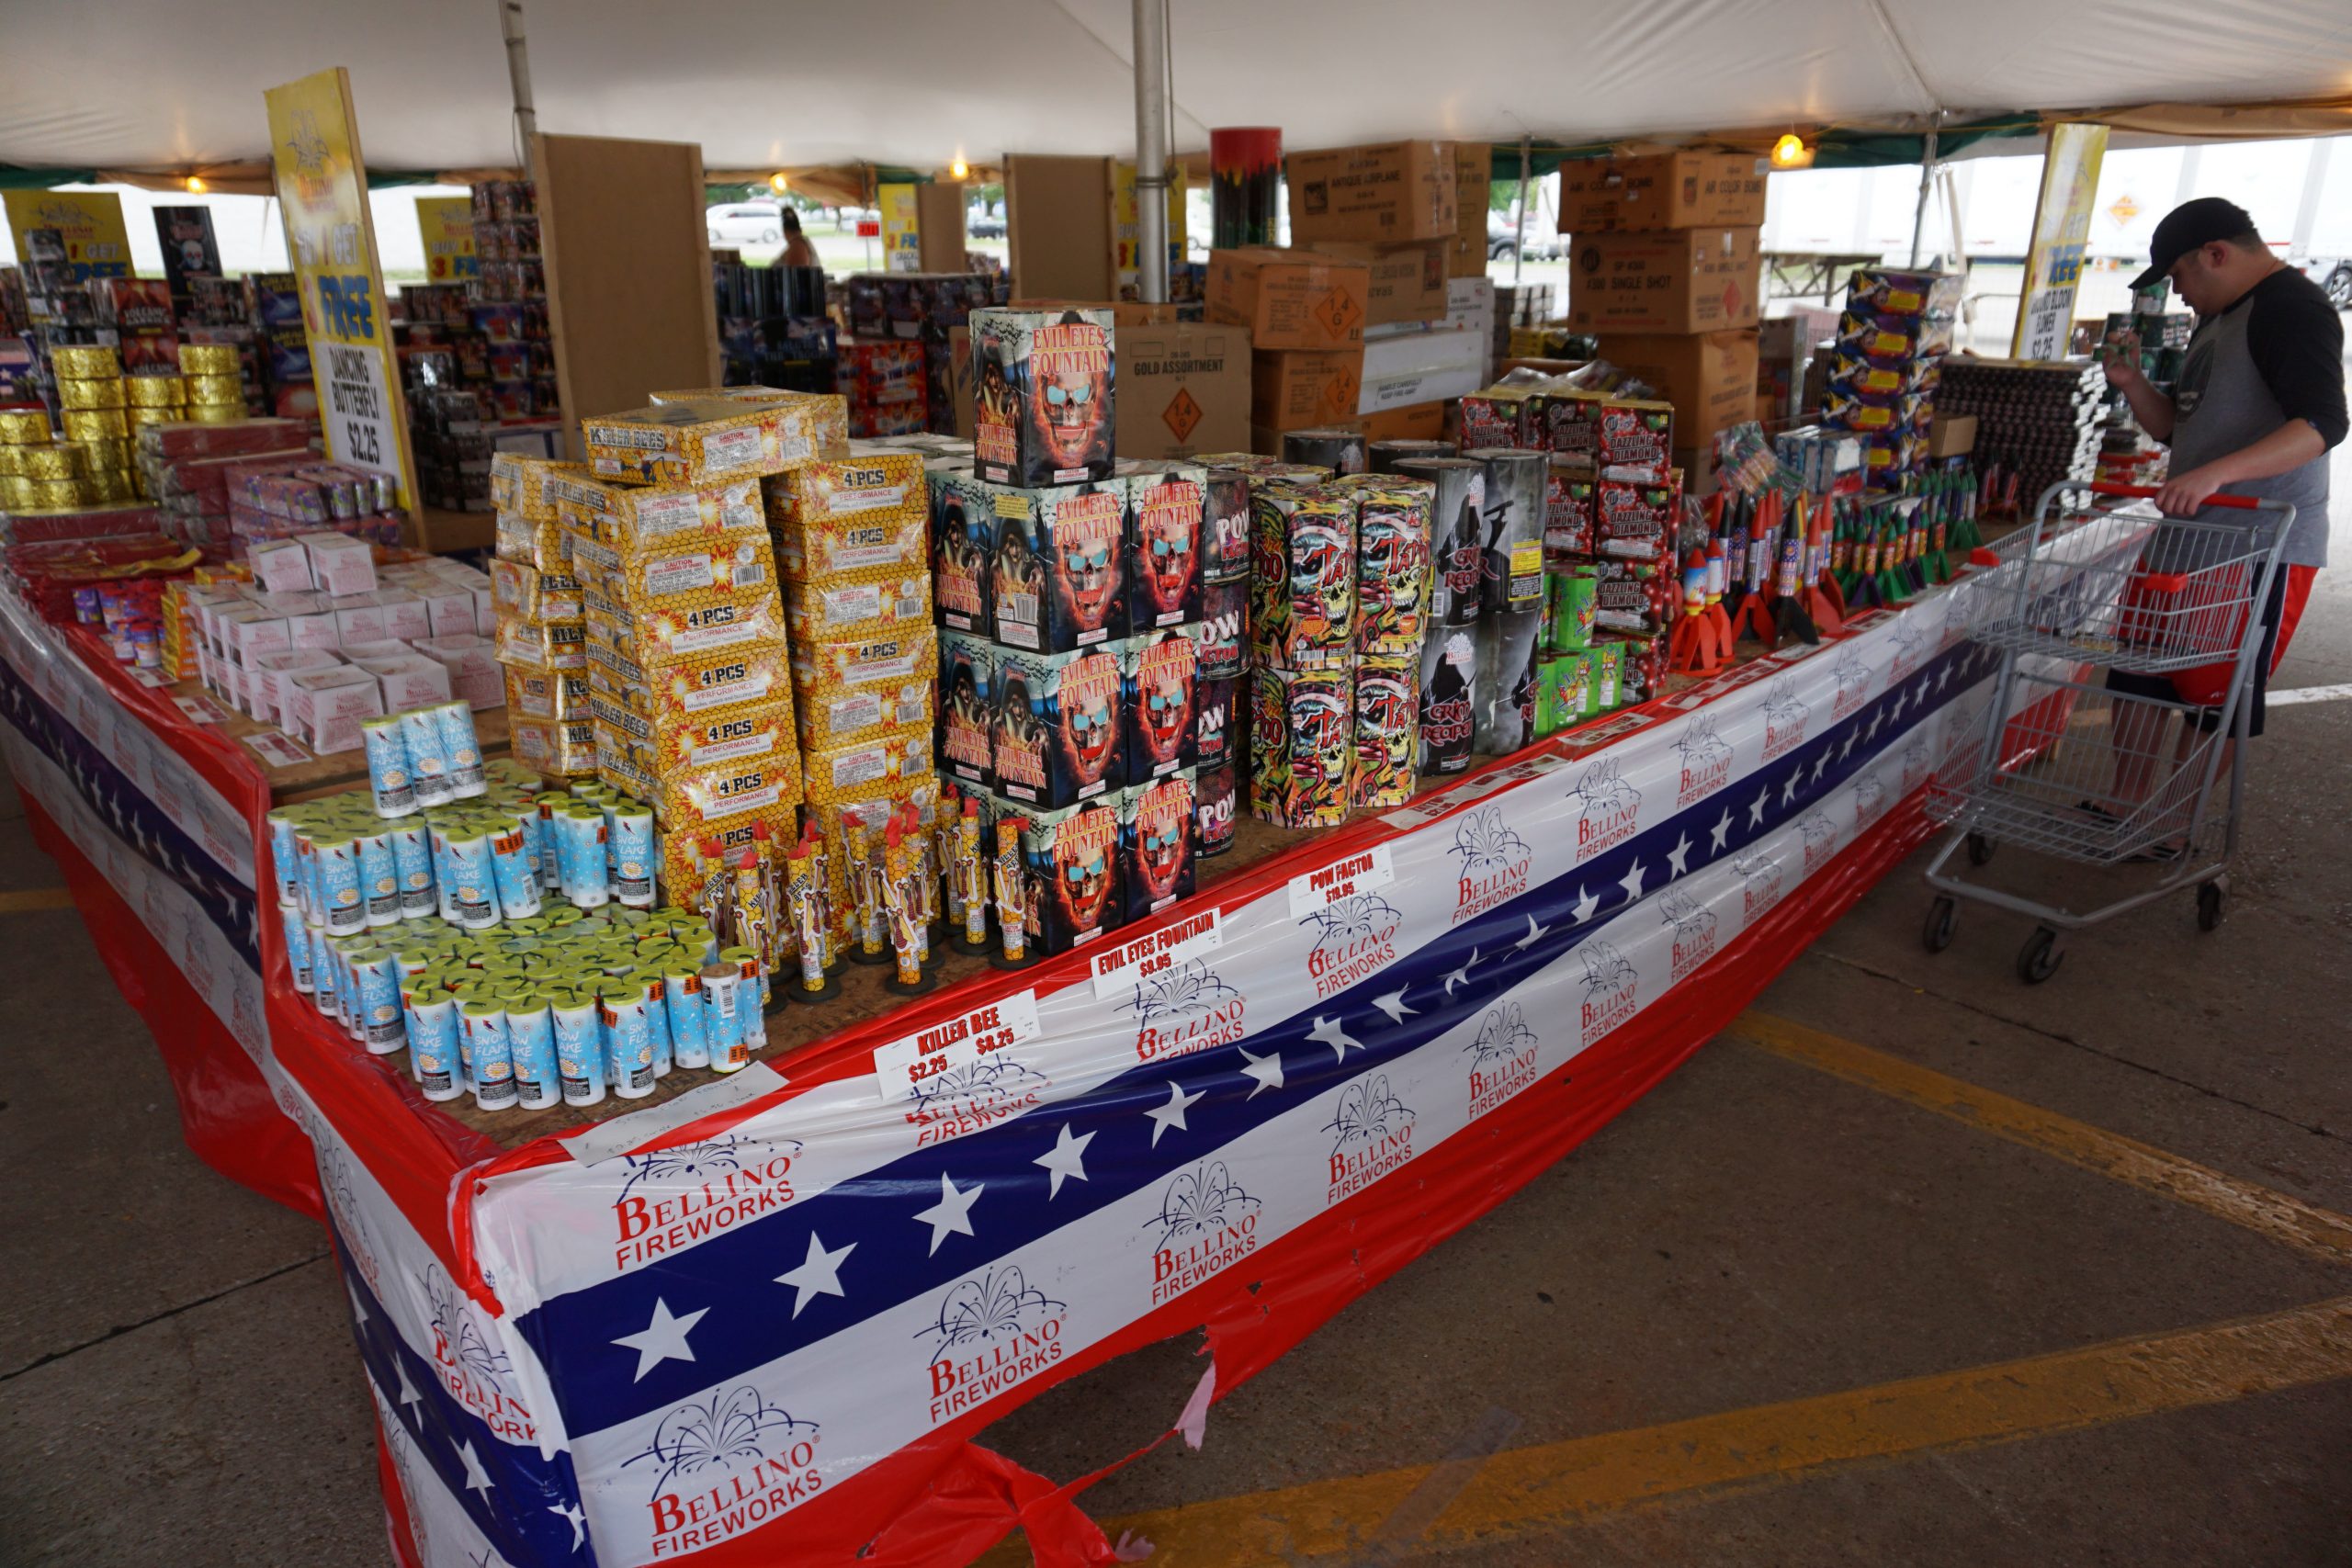 Shopper at Fireworks at the Bellino Fireworks tent at Hy-Vee 1720 Waterfront Dr, Iowa City, IA 52240